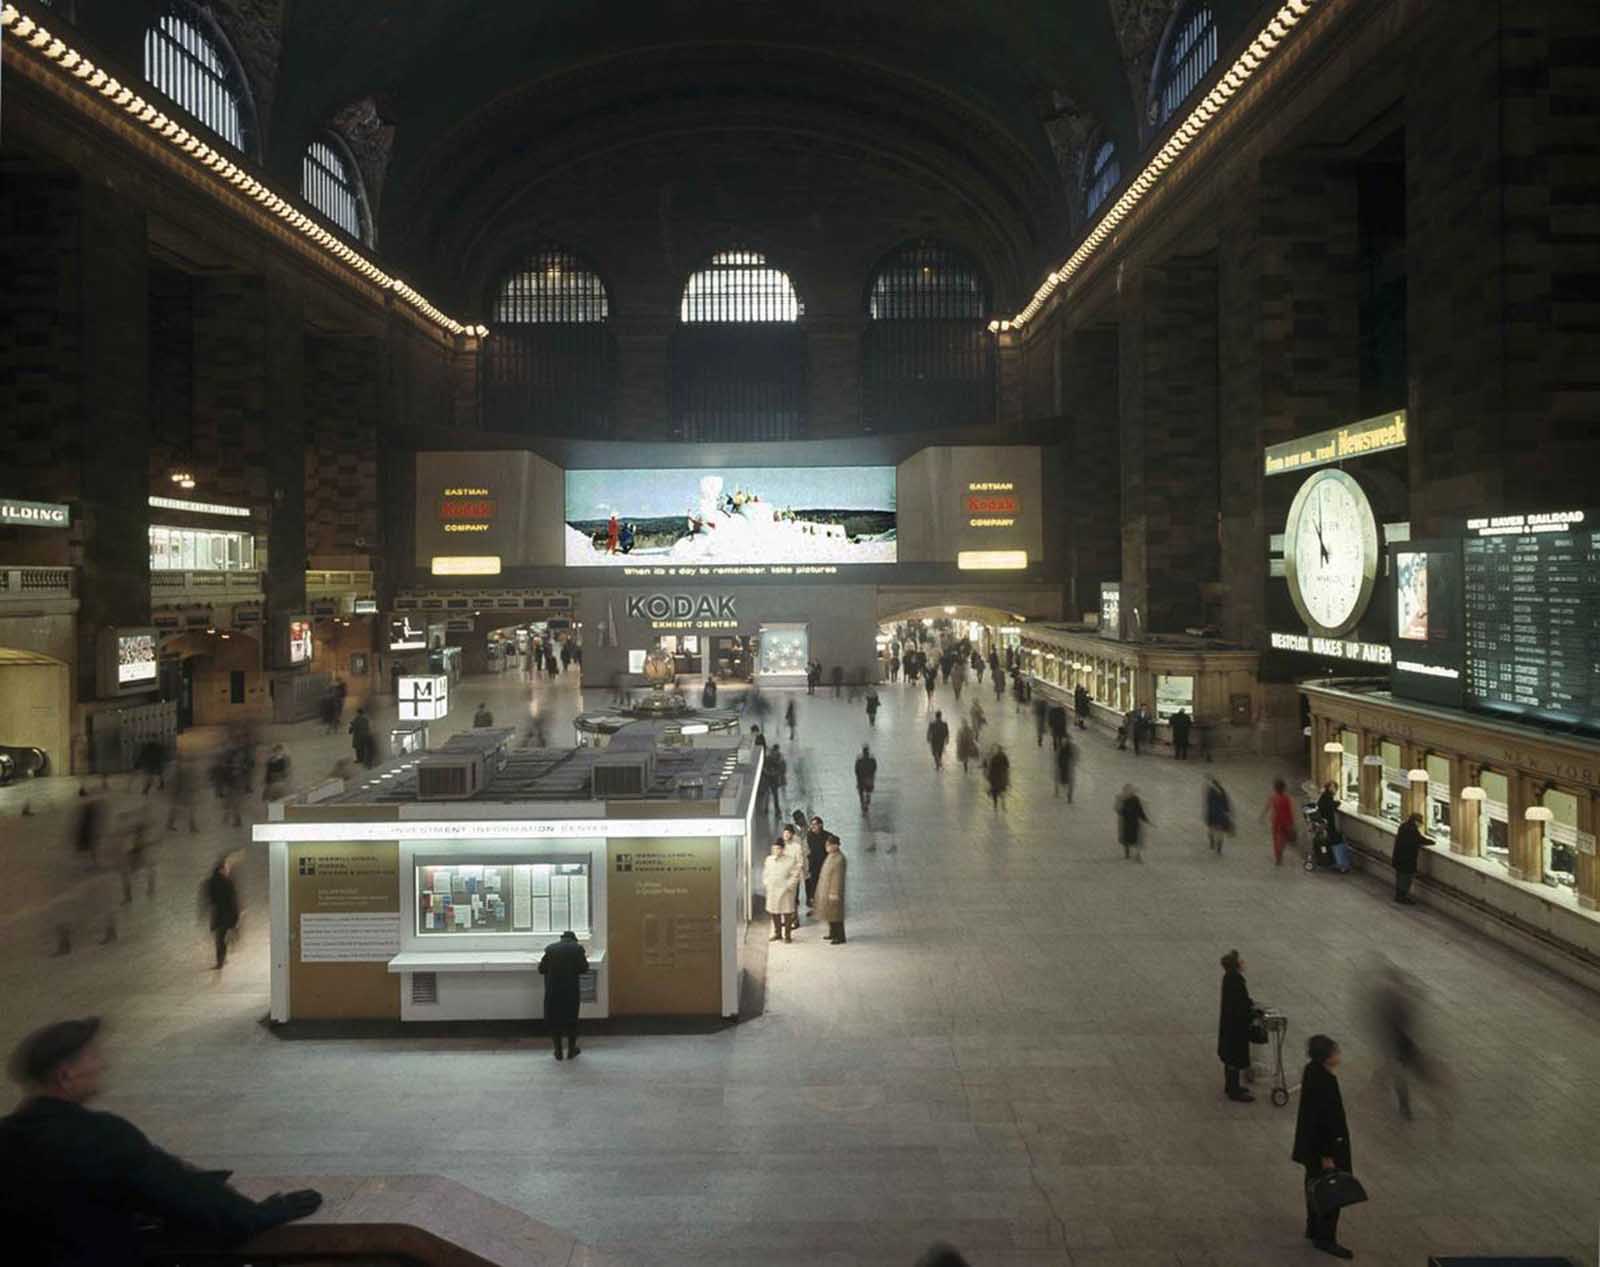 A general view of the interior of the grand concourse of New York's Grand Central Terminal, shown some time after the morning rush hour, on January 9, 1968.